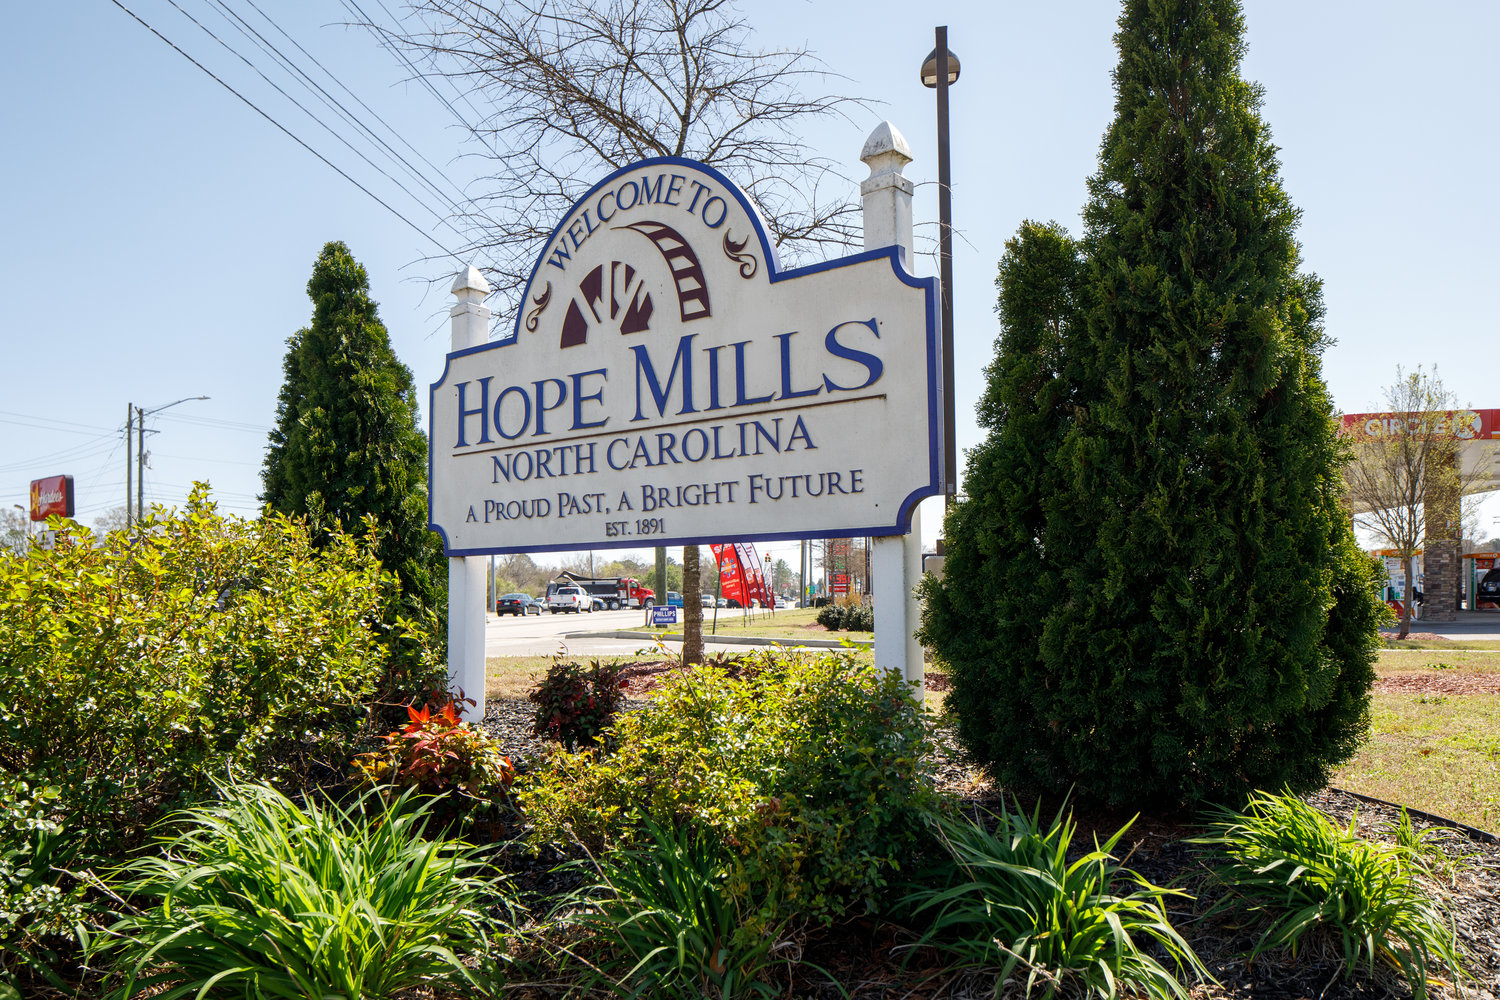 The Hope Mills Board of Commissioners on Monday is expected to approve the Maxwell Estates subdivision, a development that calls for more than 100 single-family residential lots off Chicken Foot Road.